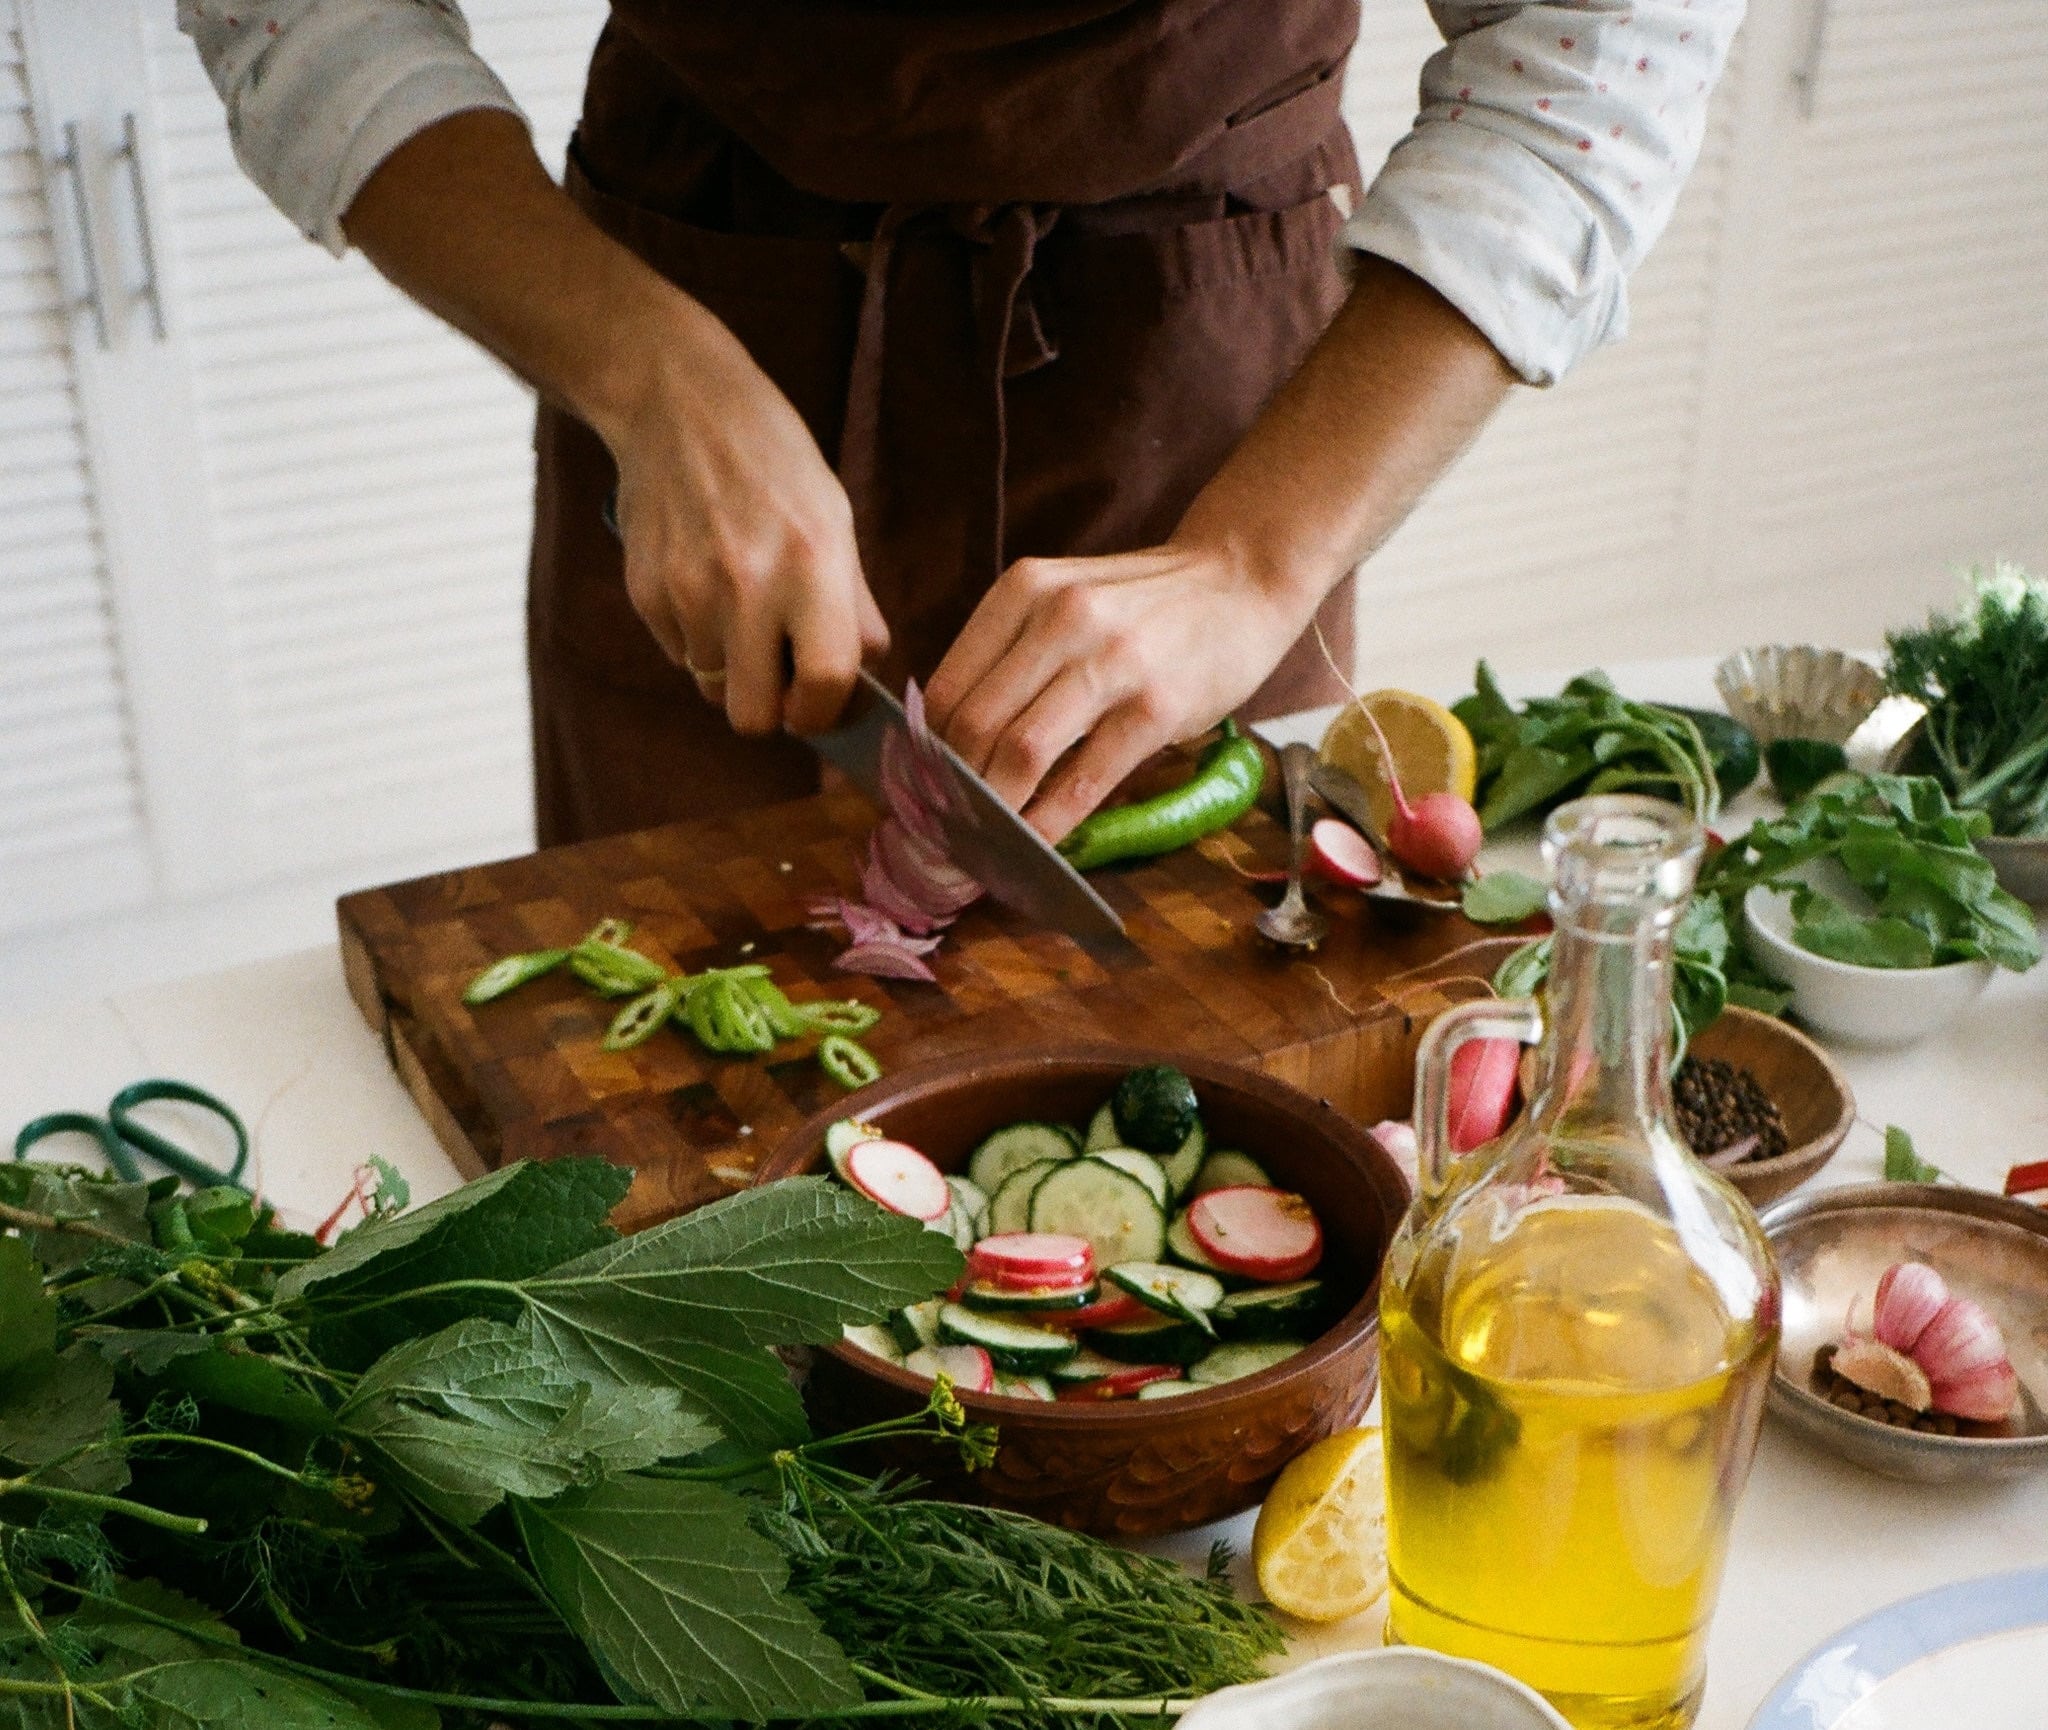 Skilled personal chef preparing a healthy meal with fresh greens and slicing an onion, showcasing Grapevine Placements Agency's extensive range of domestic help services, and culinary expertise